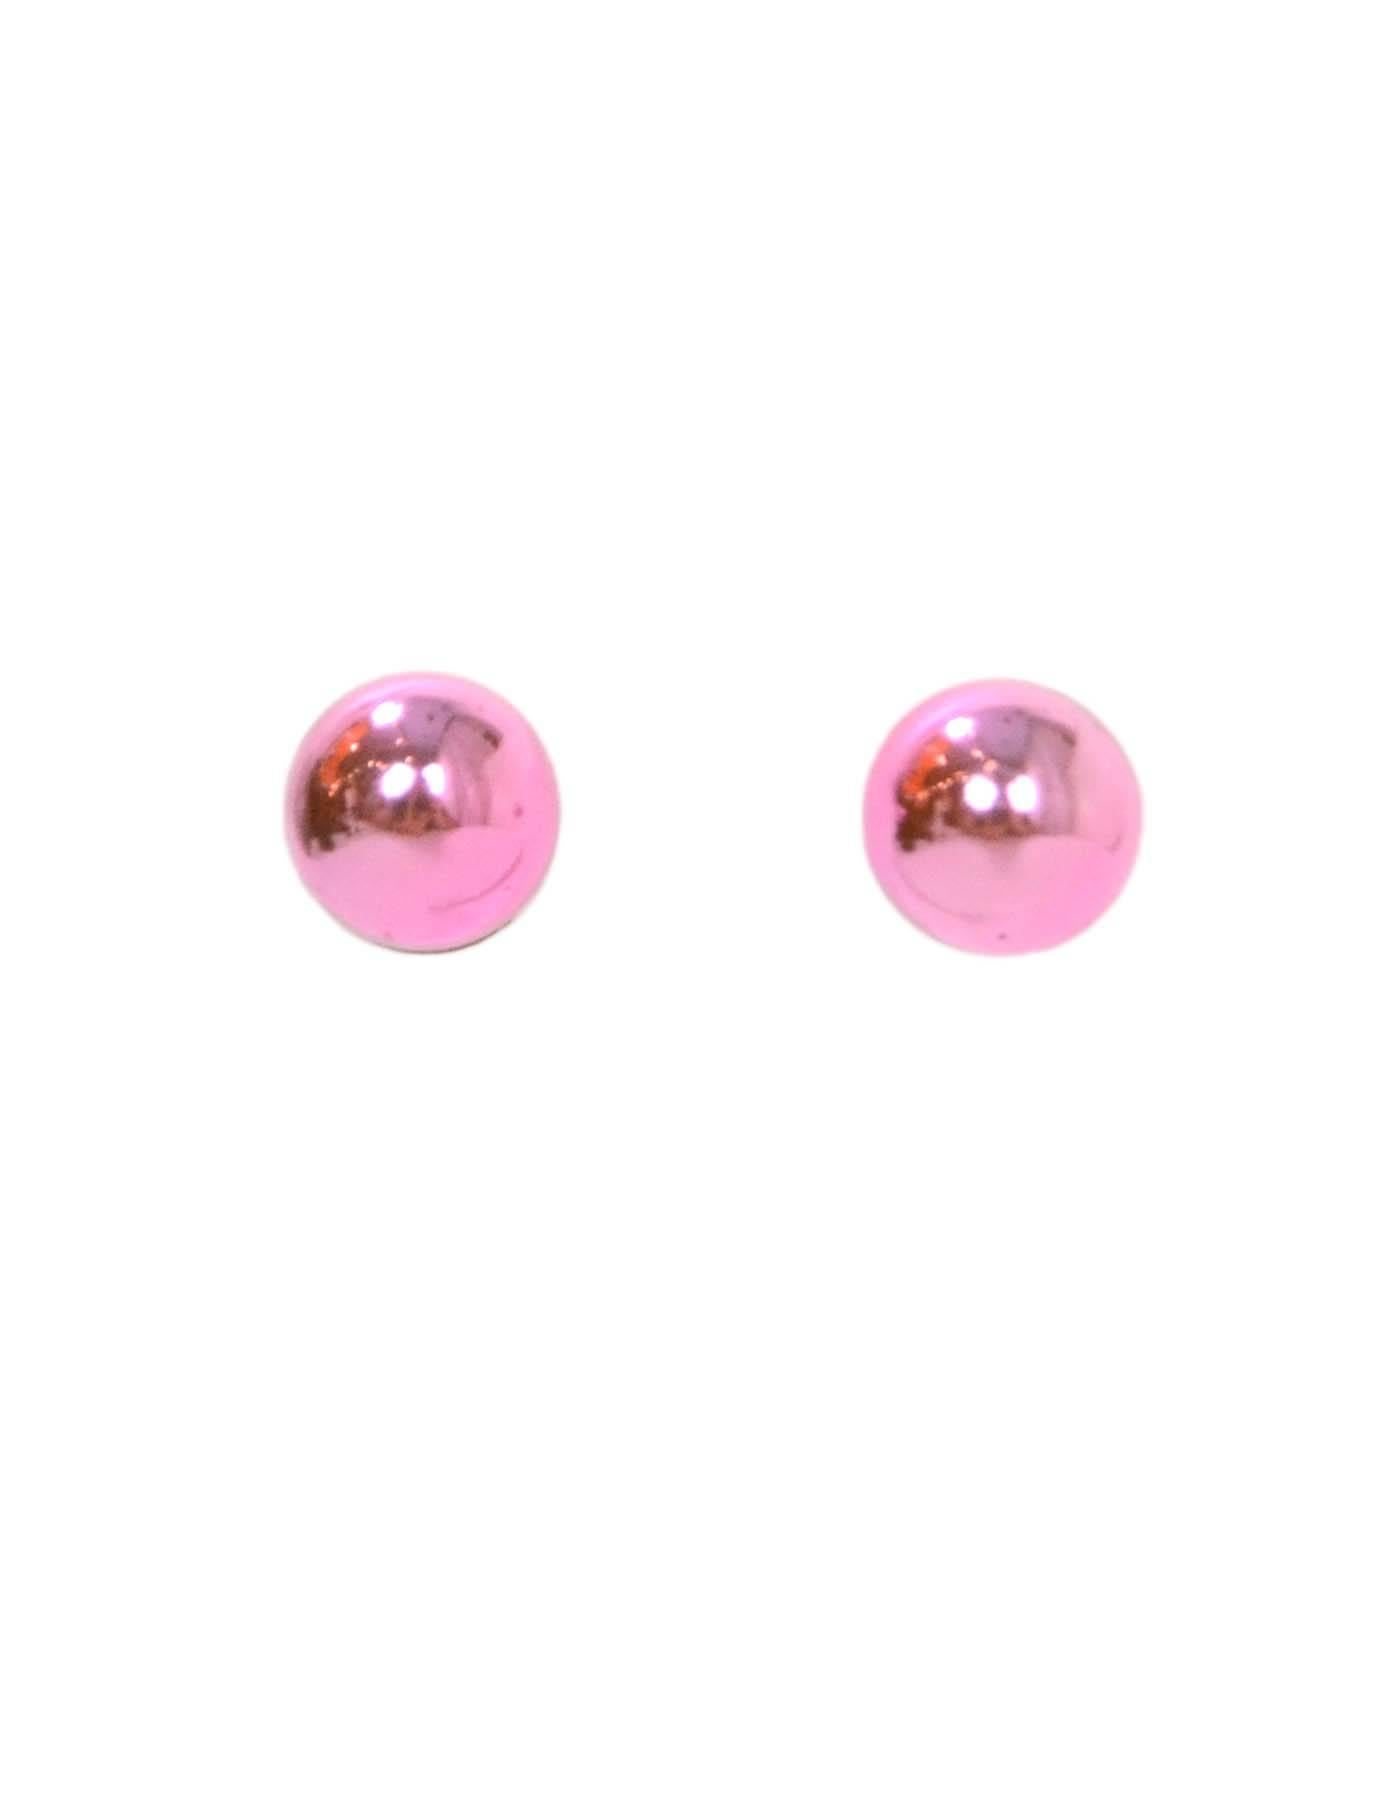 Dior Metallic Pink Miss en Dior Tribal Earrings

Color: Metallic pink
Hardware: Silvertone
Materials: Metal and enamel
Closure: Pierced back with smaller metallic pink ball at end
Stamp: Dior
Overall Condition: Excellent pre-owned